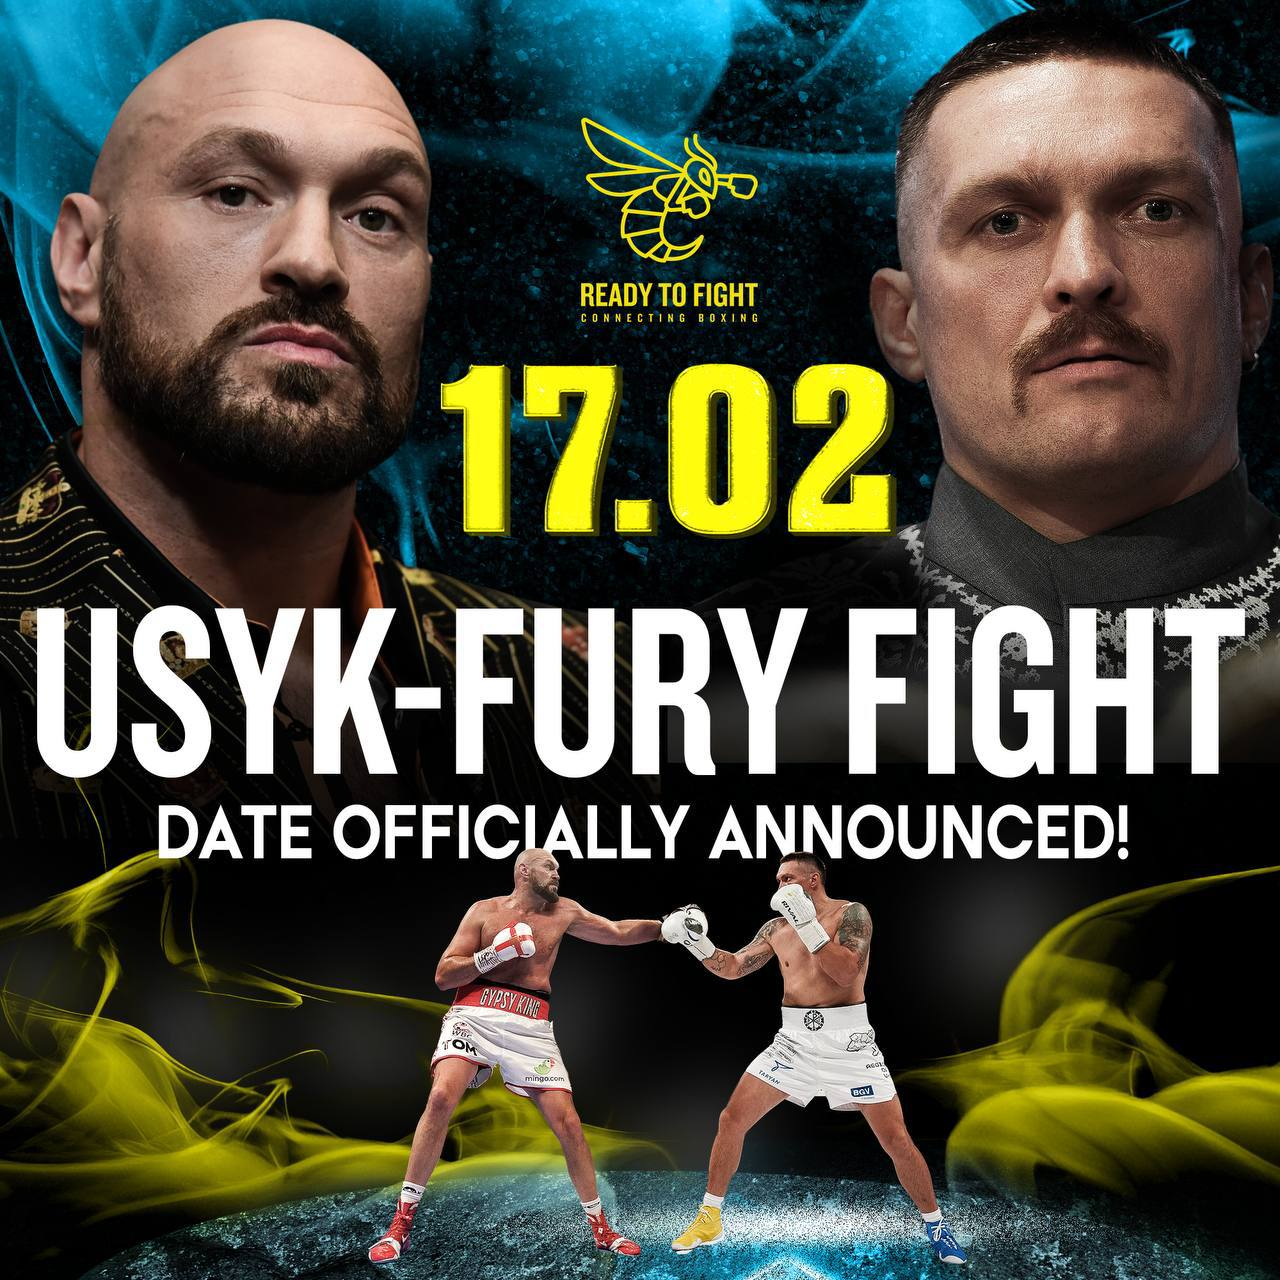 Russian portal criticized Fury before the fight with Usyk, calling his career the personification of boxing's problems today